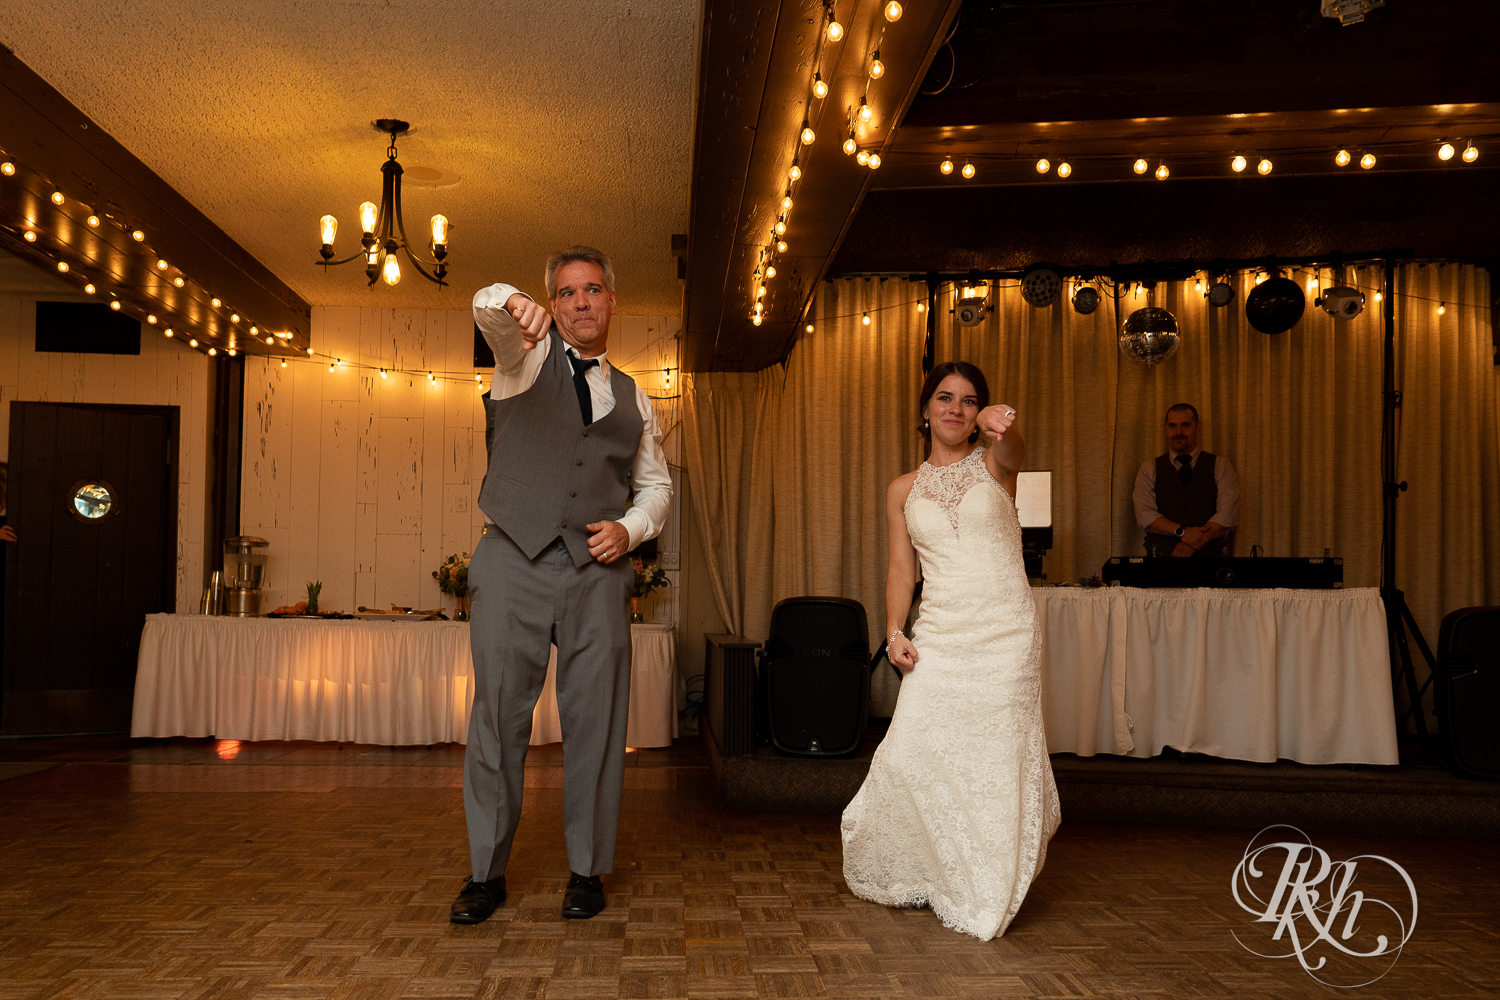 Bride and her dad dance during wedding reception at The Chart House in Lakeville, Minnesota.